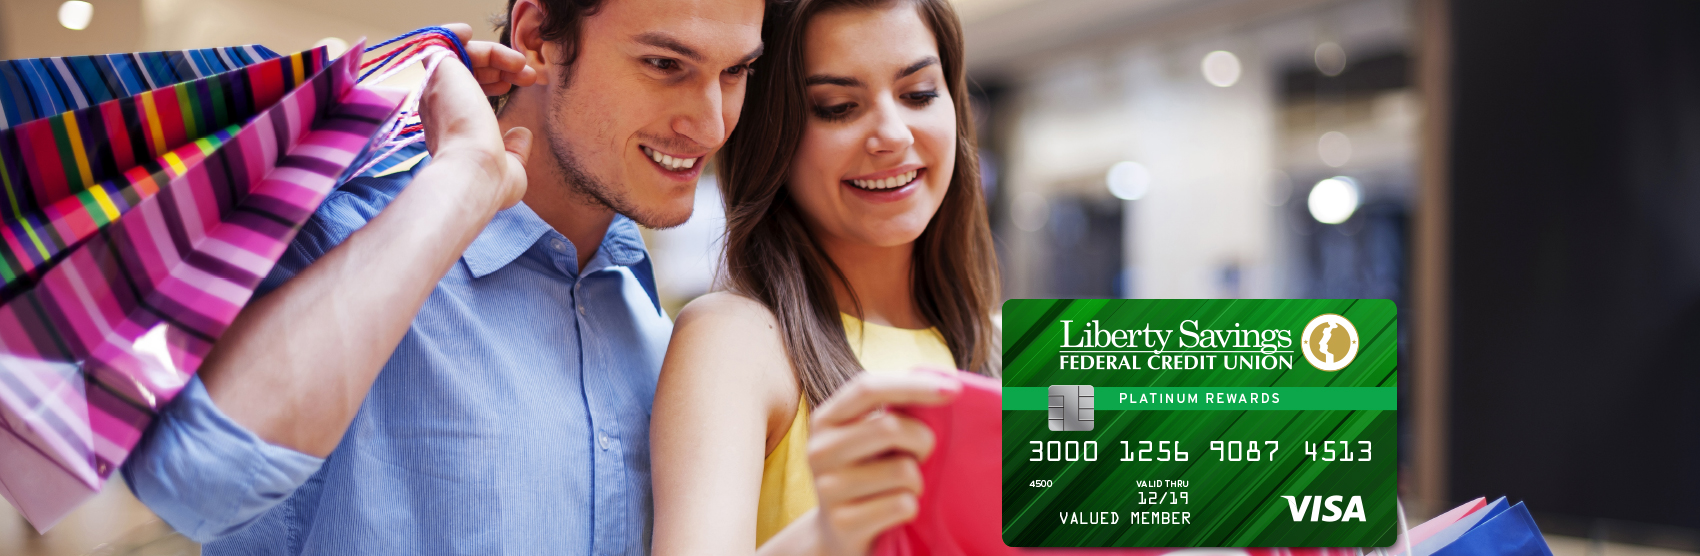 Photo of couple shopping for clothes with Visa card image